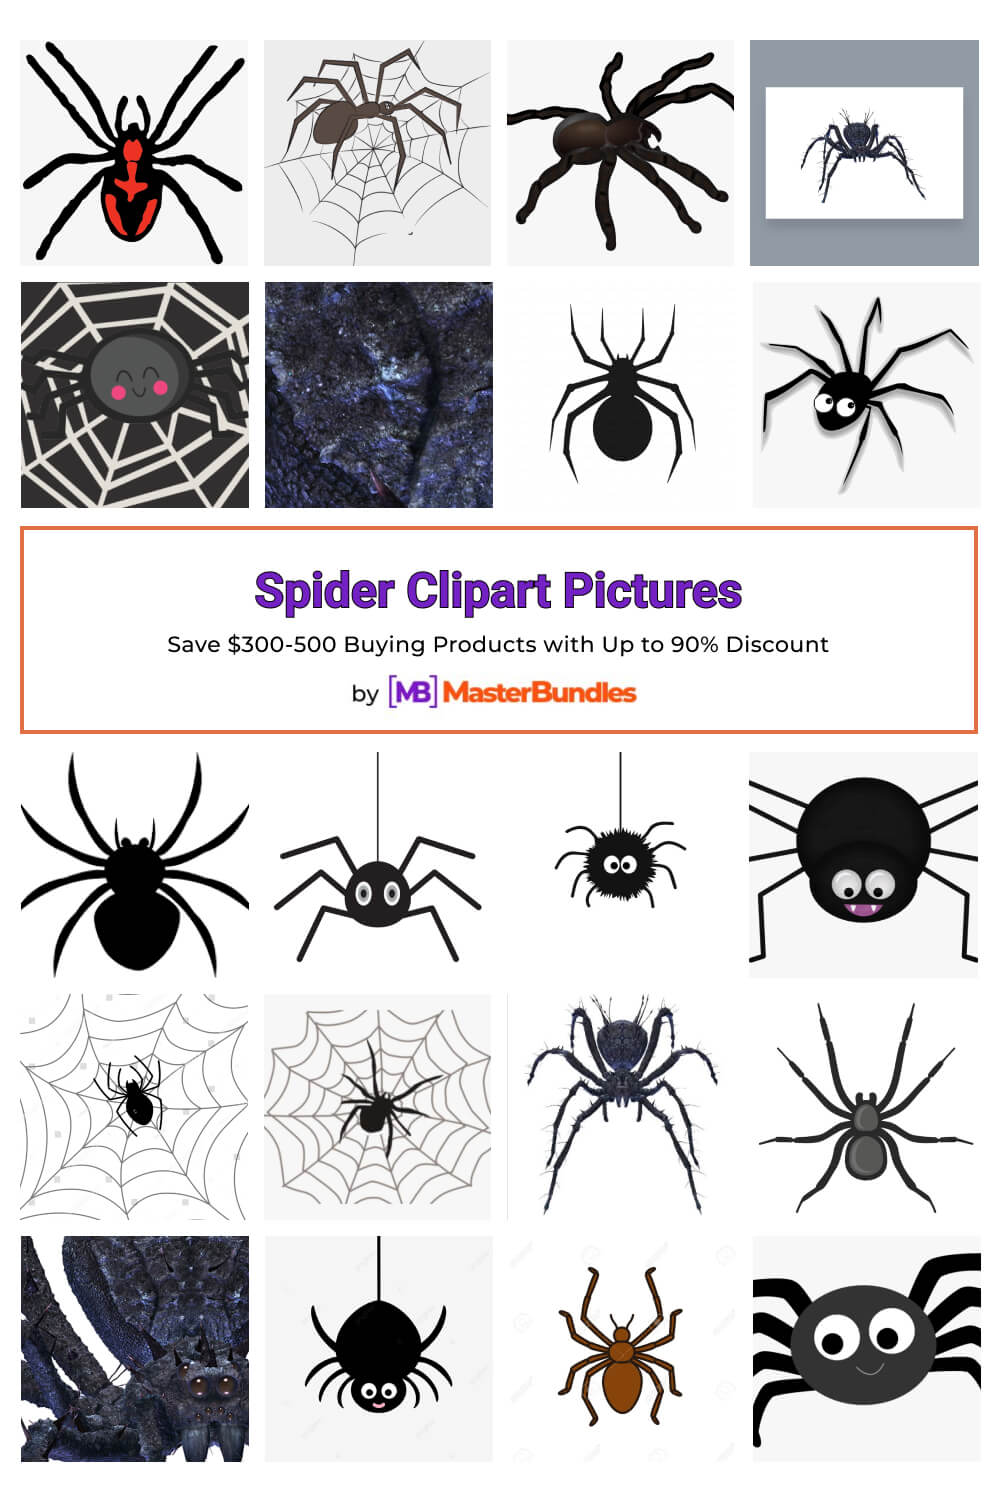 spider clipart pictures pinterest image.